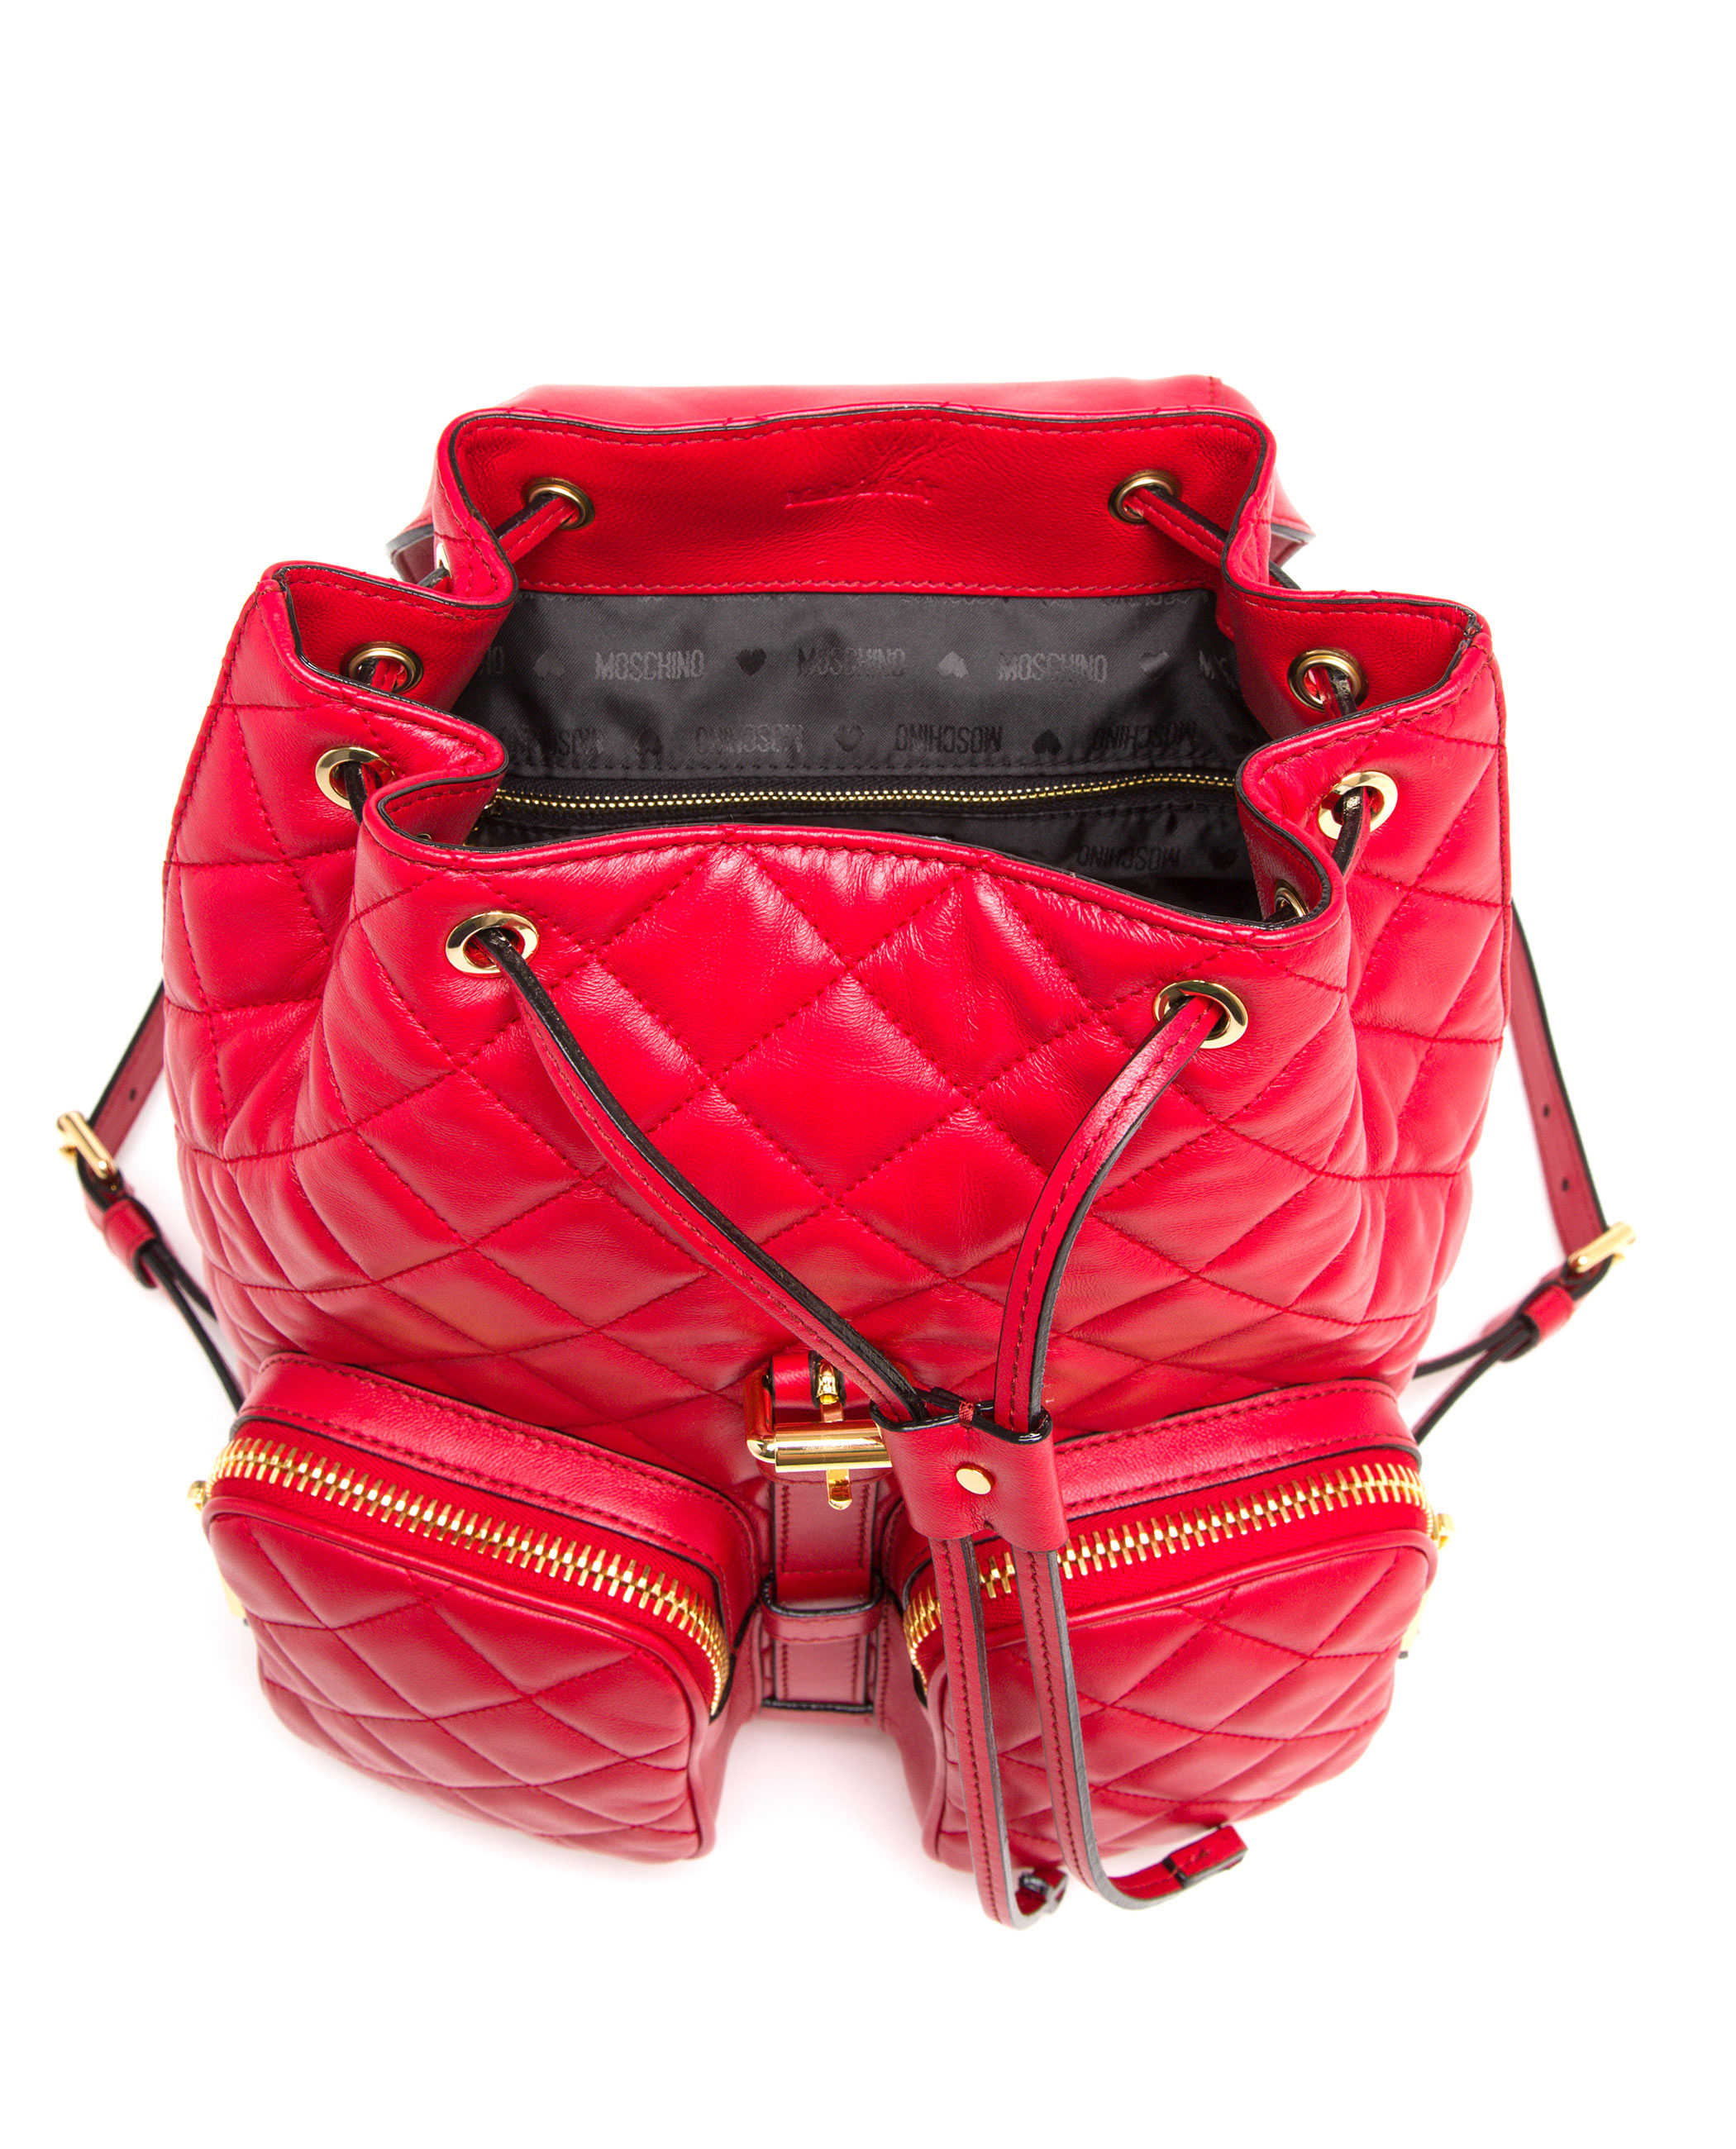 Lyst - Moschino Red Leather Backpack in Red